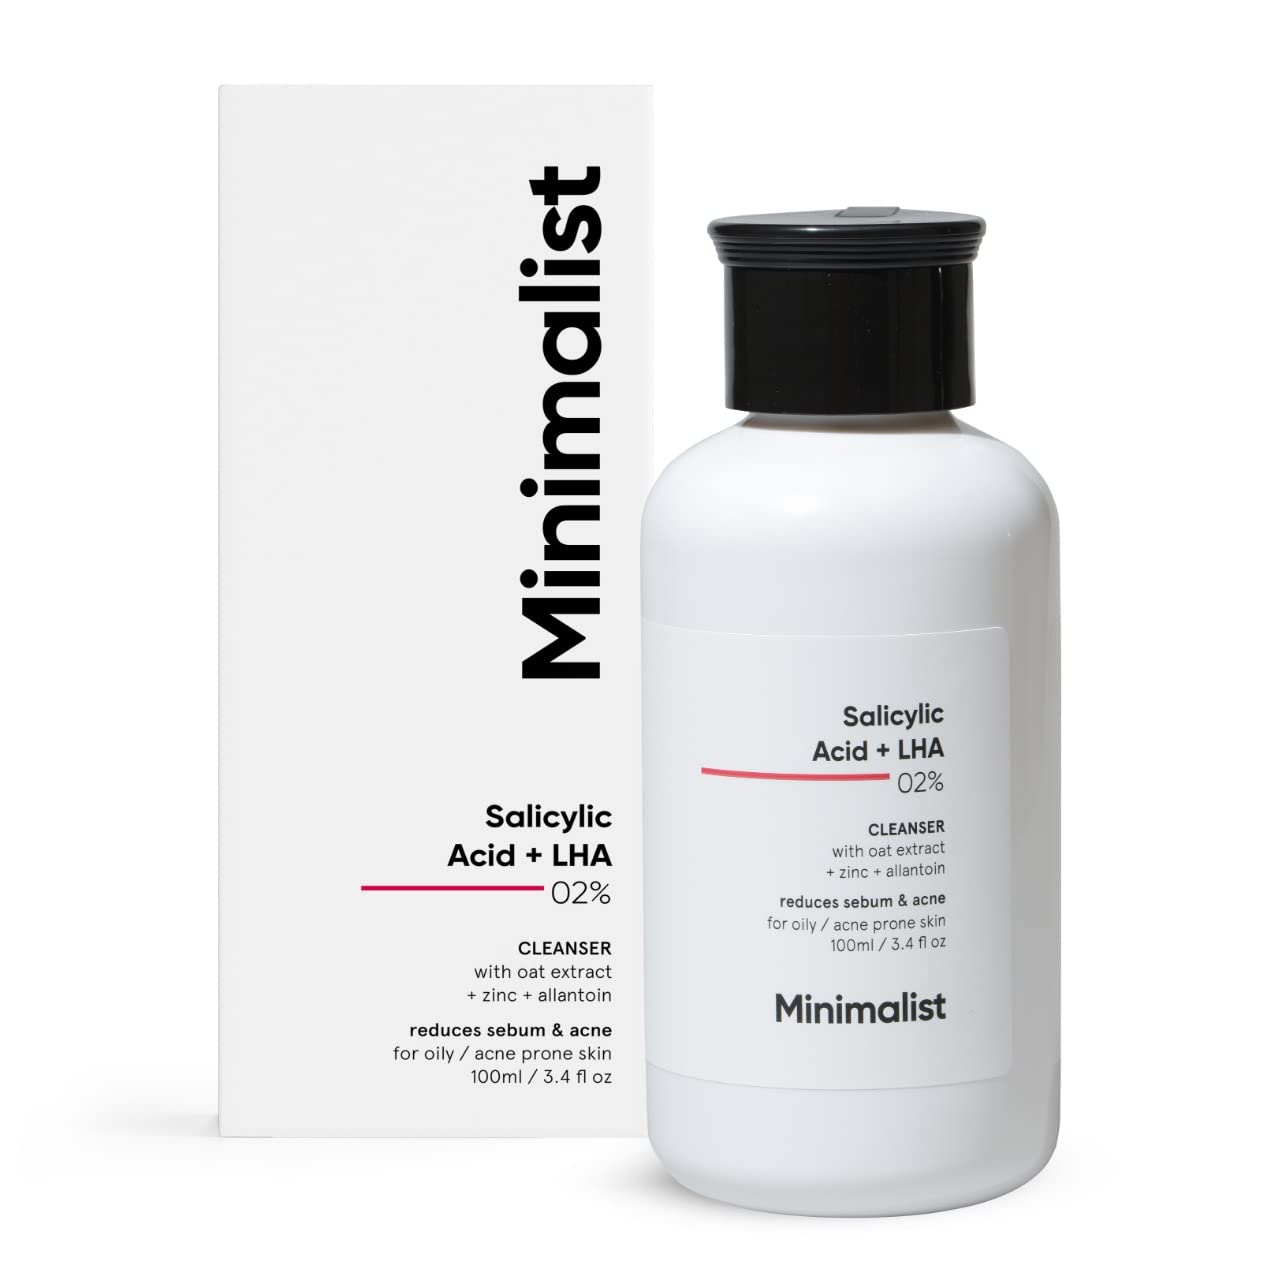 must use exact Minimalist 2% Salicylic Acid Face Wash For Oily Skin | Sulphate free, Anti Acne Face Cleanser With LHA & Zinc For Acne or Pimples | Men & Women 100 ml